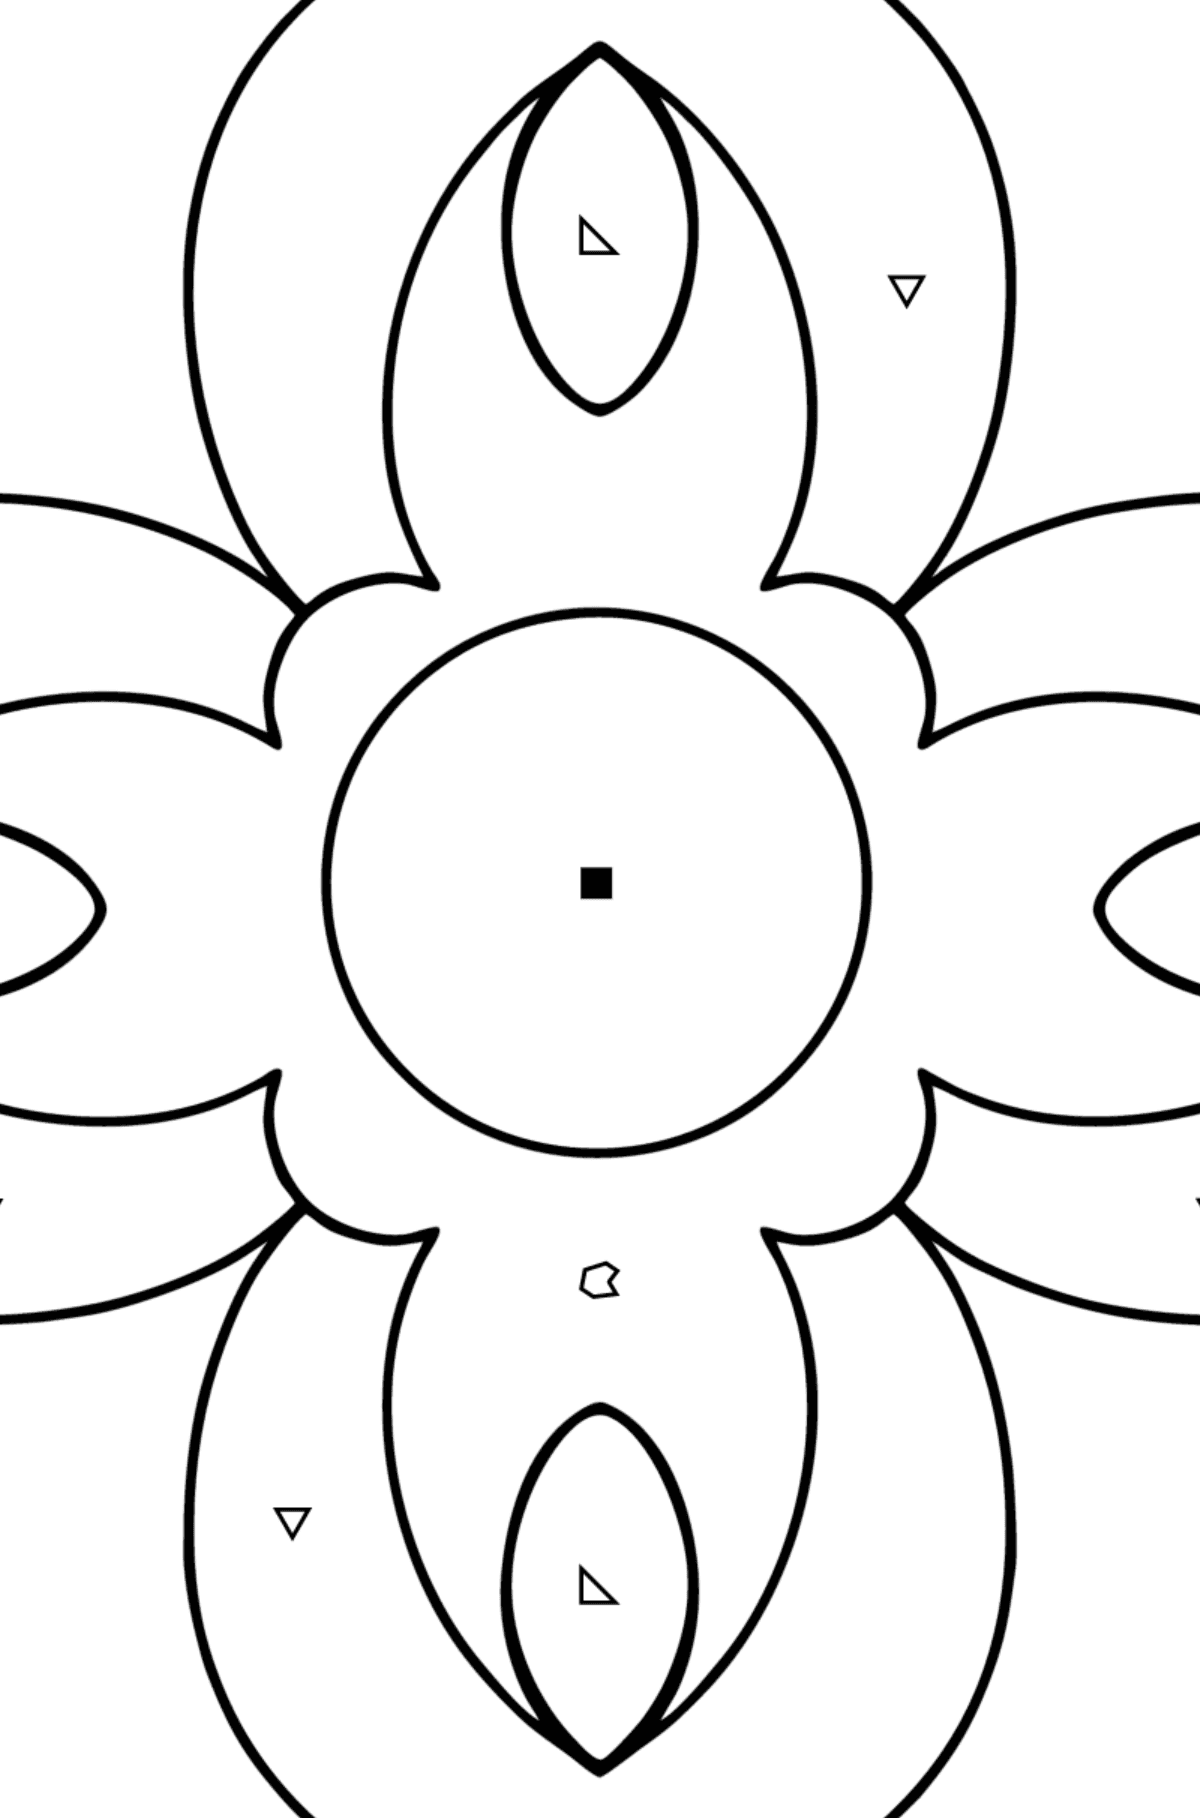 Coloring book for kids - Anti stress flower - Coloring by Symbols and Geometric Shapes for Kids